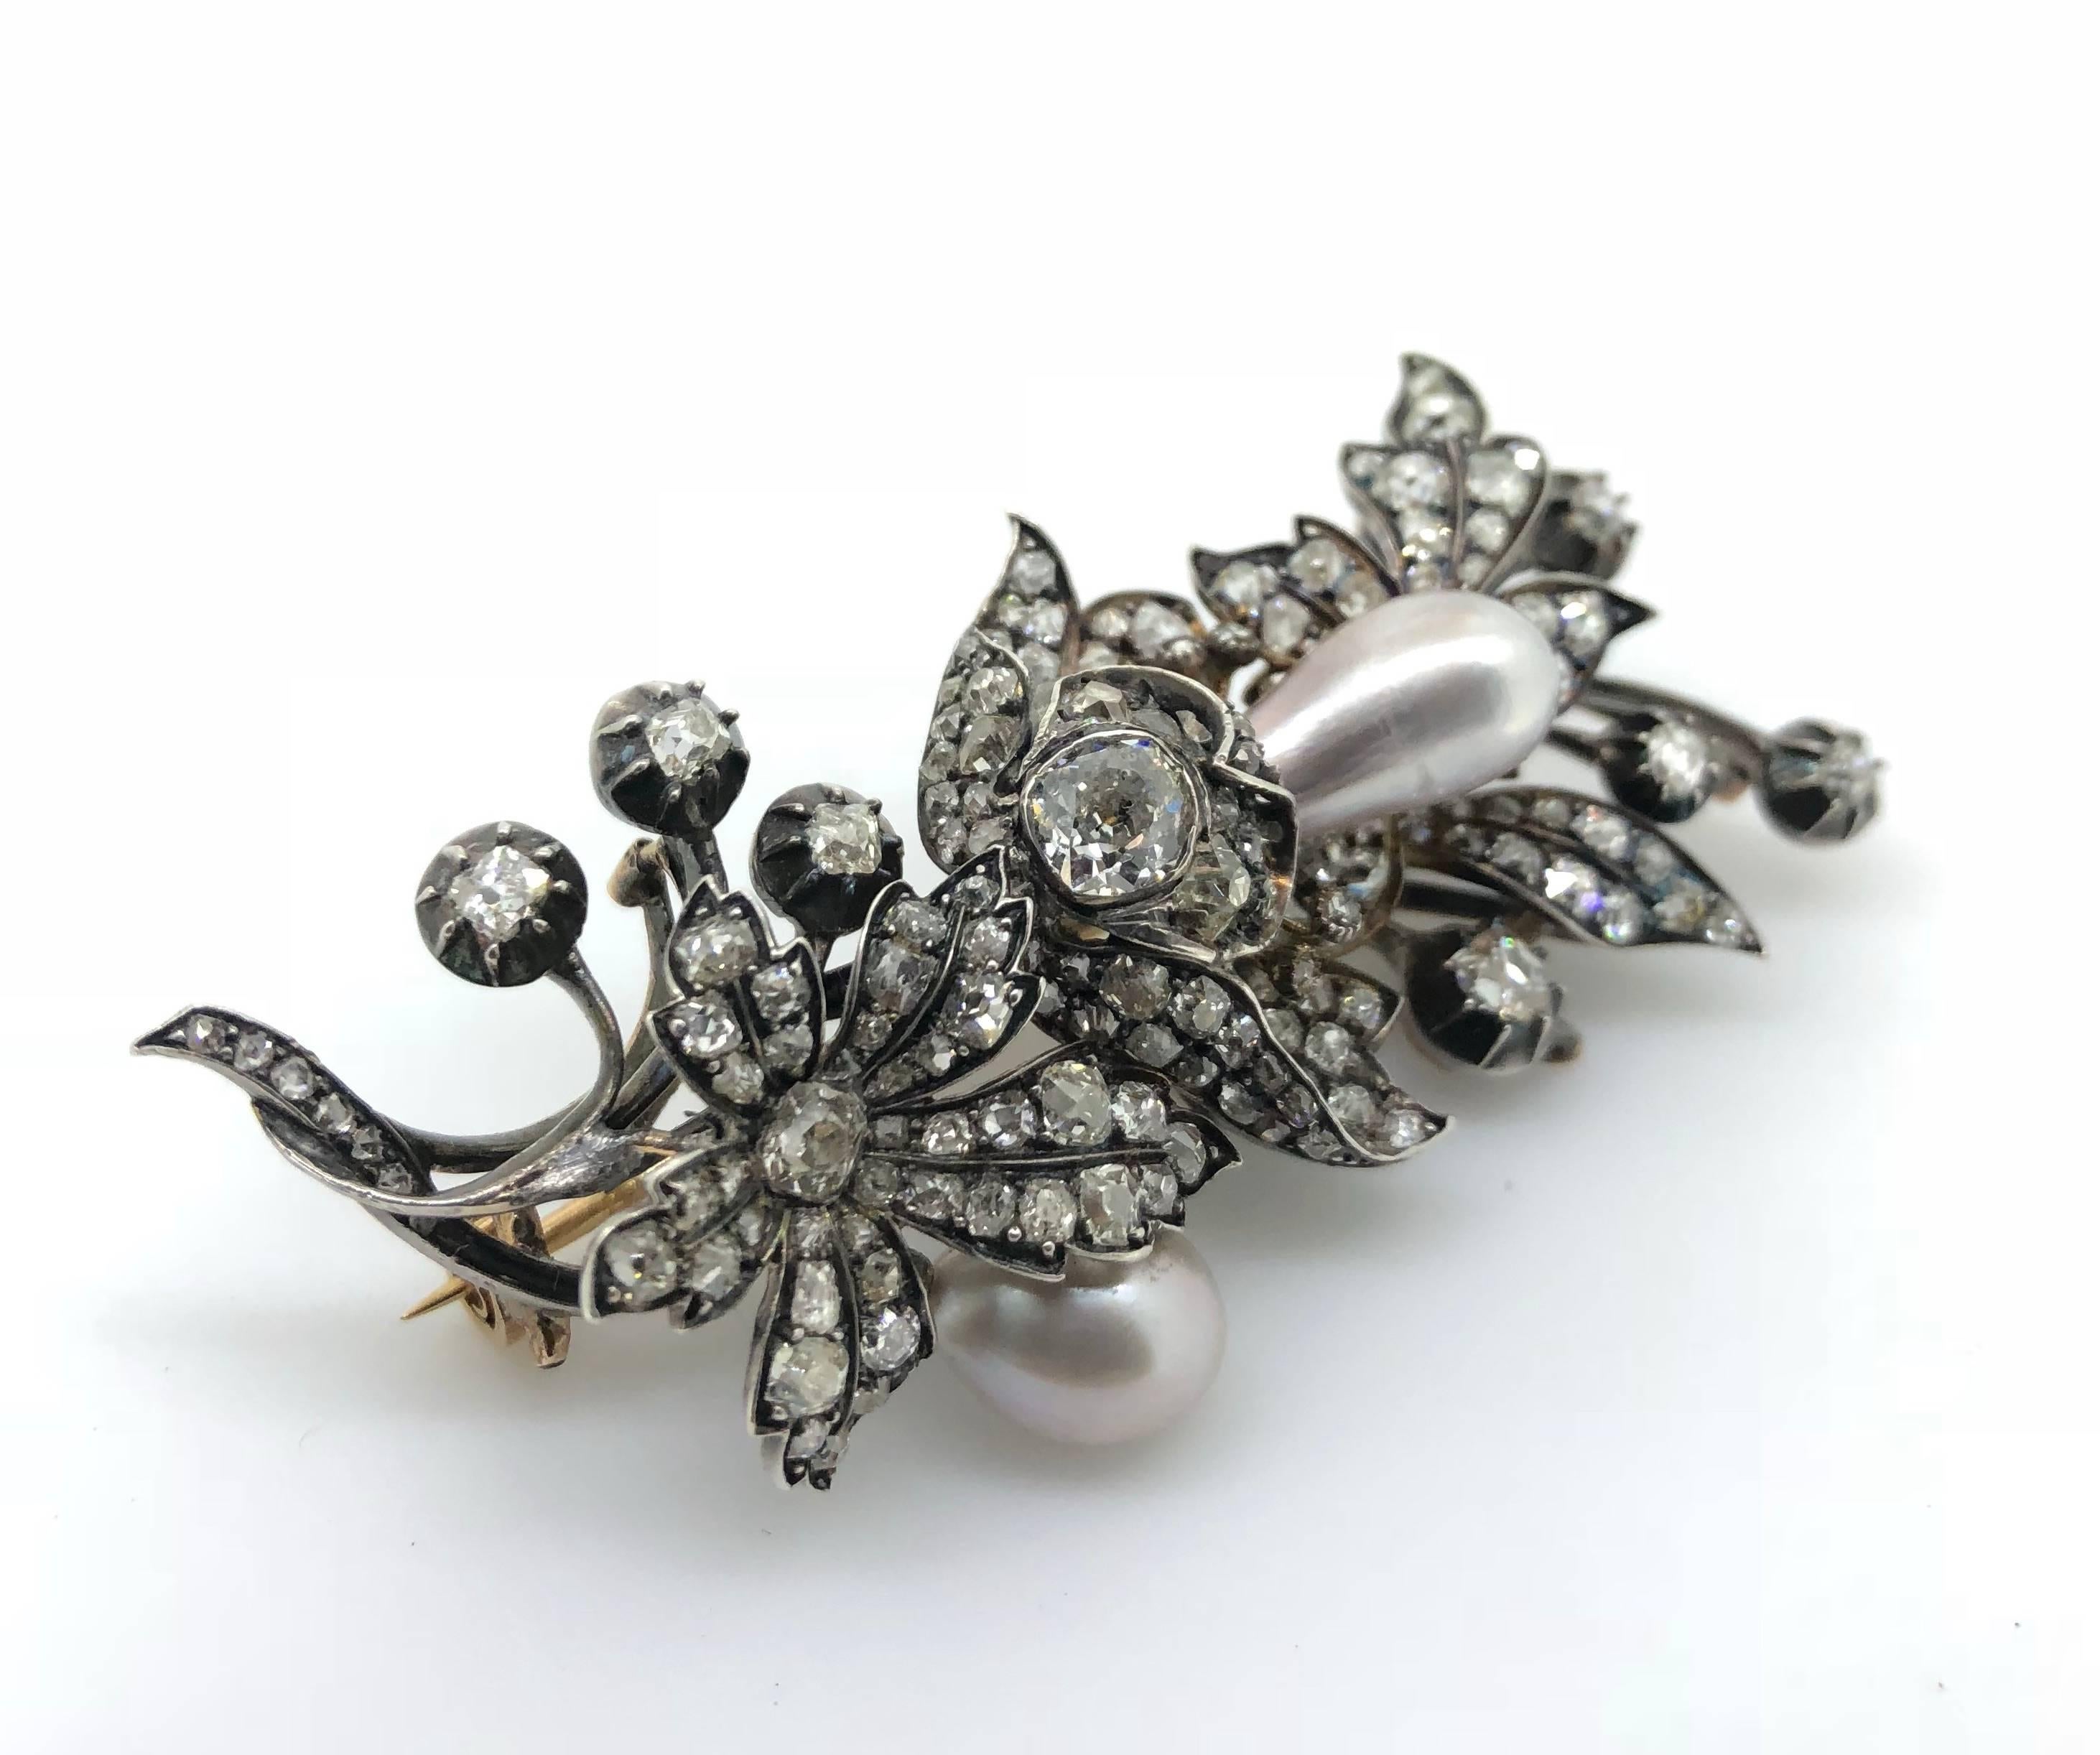 A natural pearl and diamond spray brooch, circa 1860
Of floral and foliate design, set with two drop-shaped natural pearls of grey tint, within a similarly-cut diamond surround, to pinched-collet set cushion-shaped diamond buds, cushion-shaped